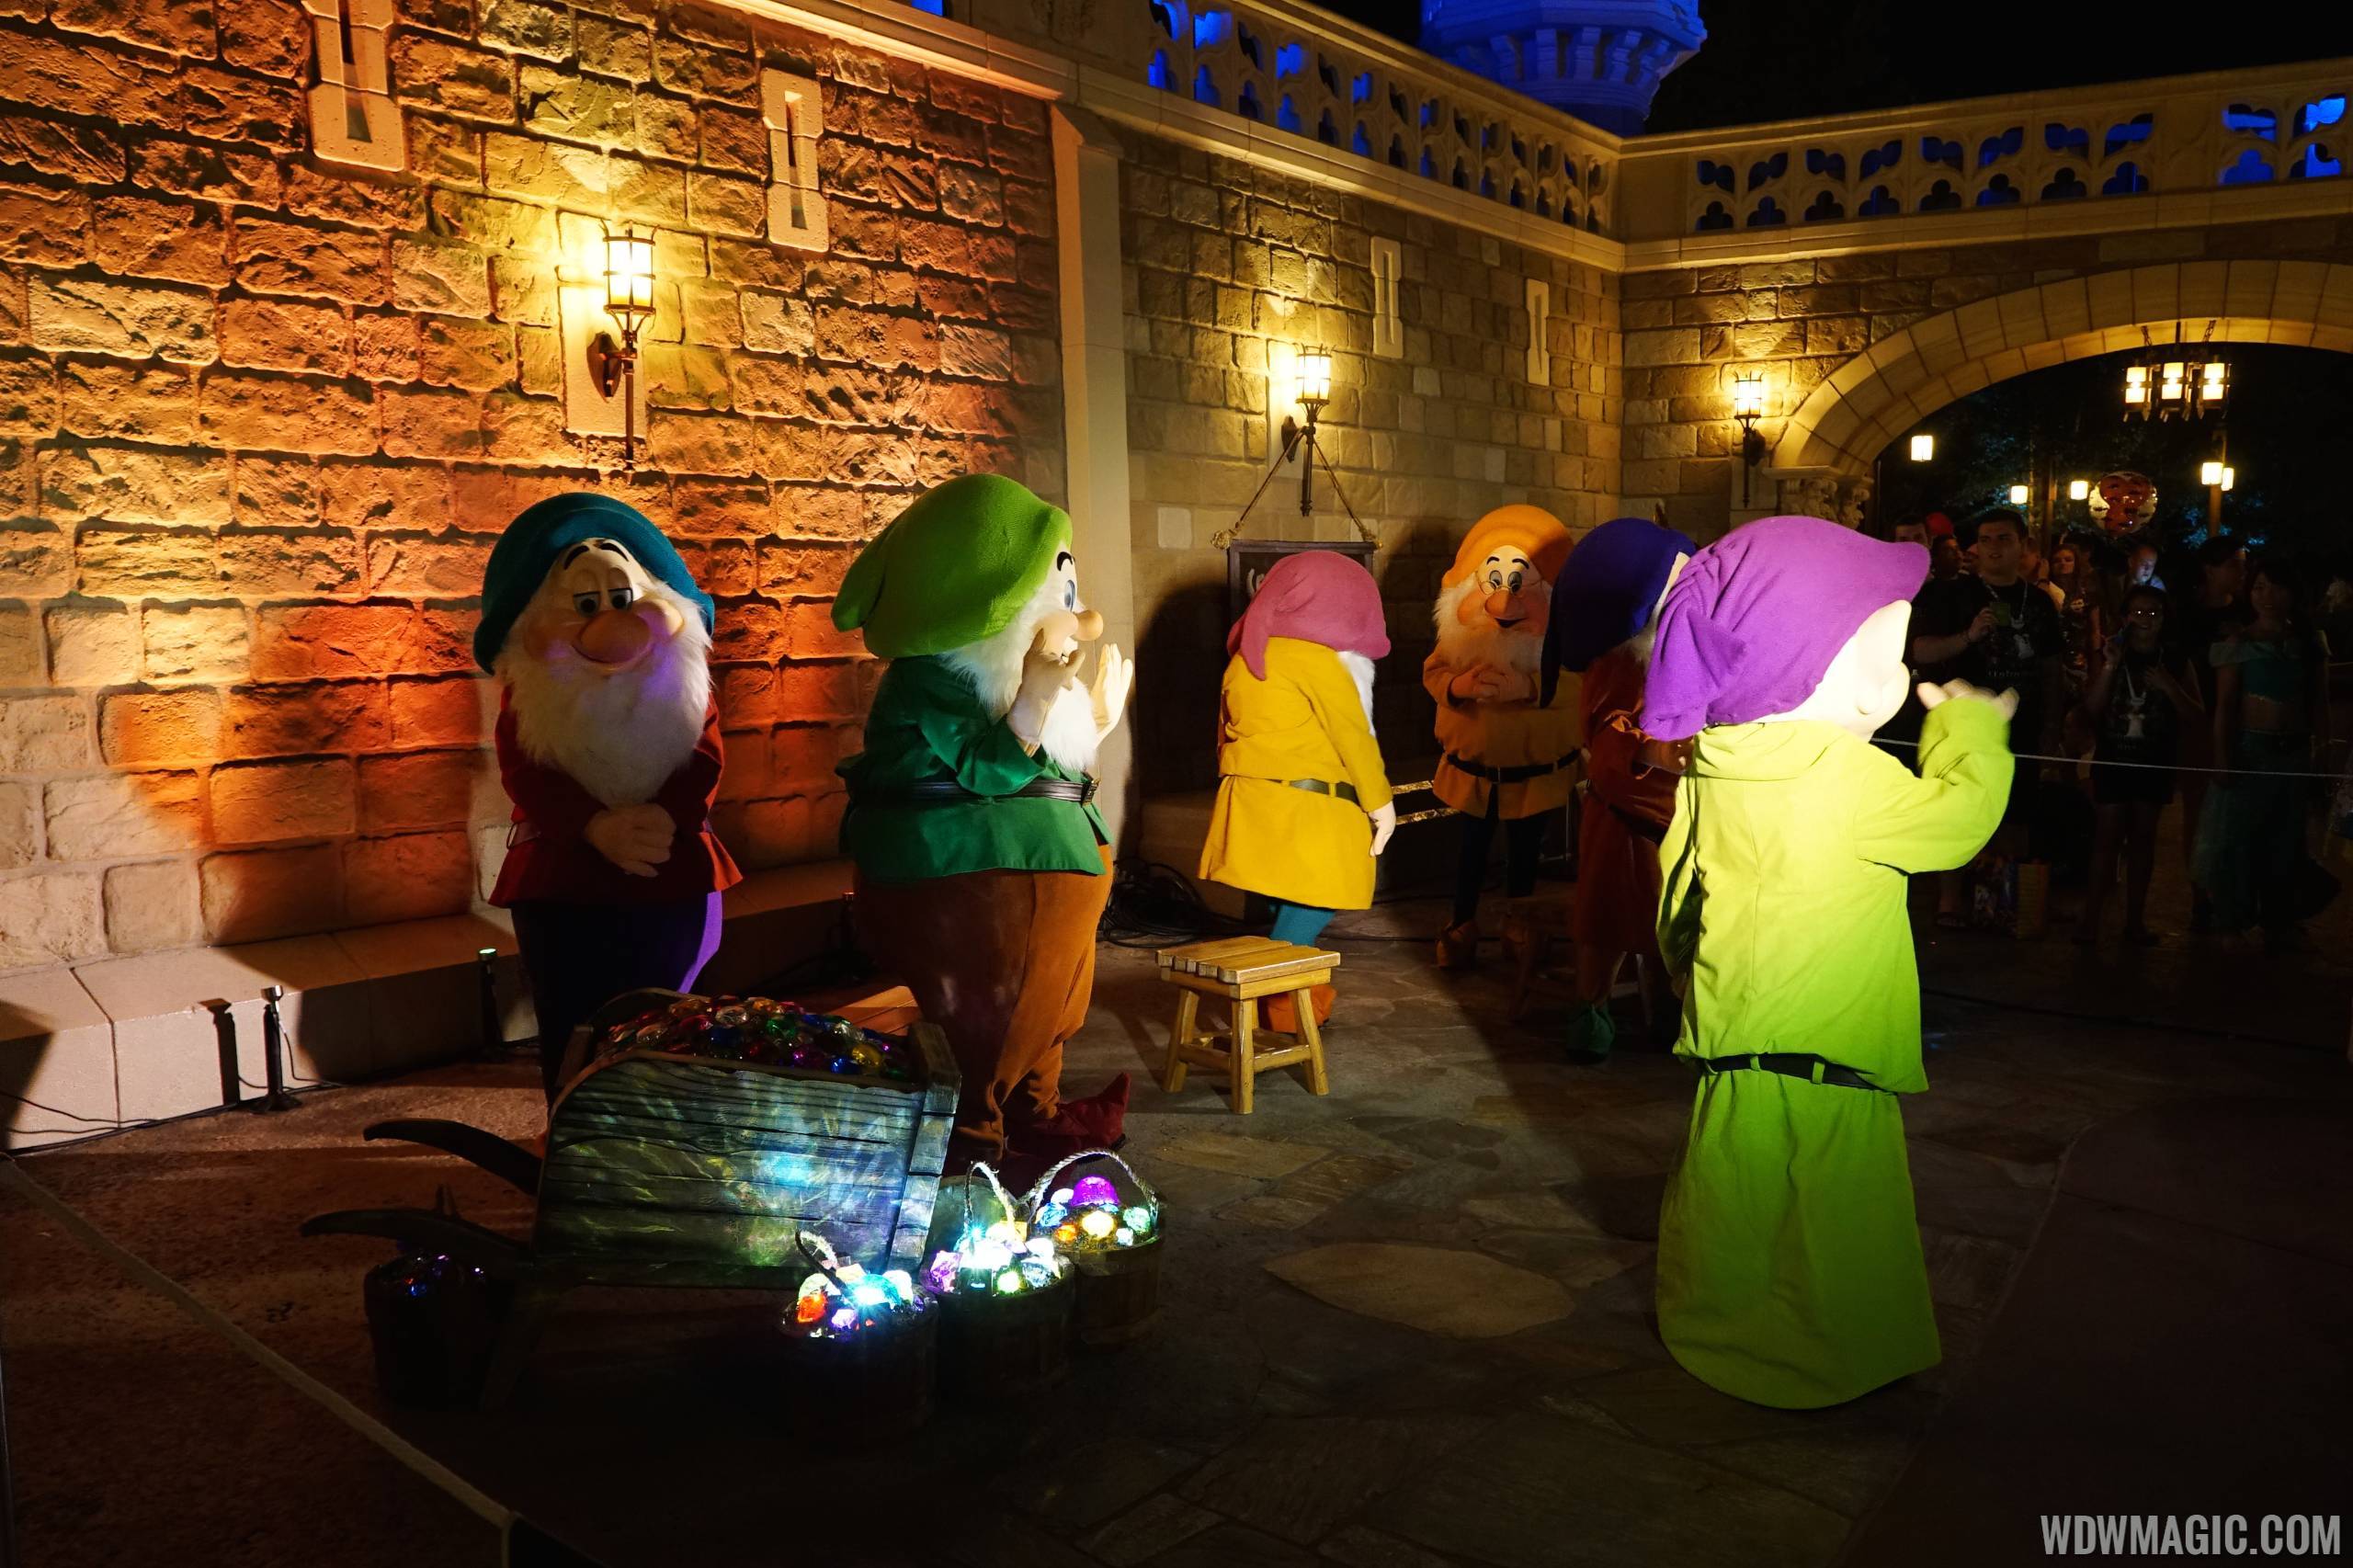 Seven Dwarfs meet and greet at Mickey's Not So Scary Halloween Party